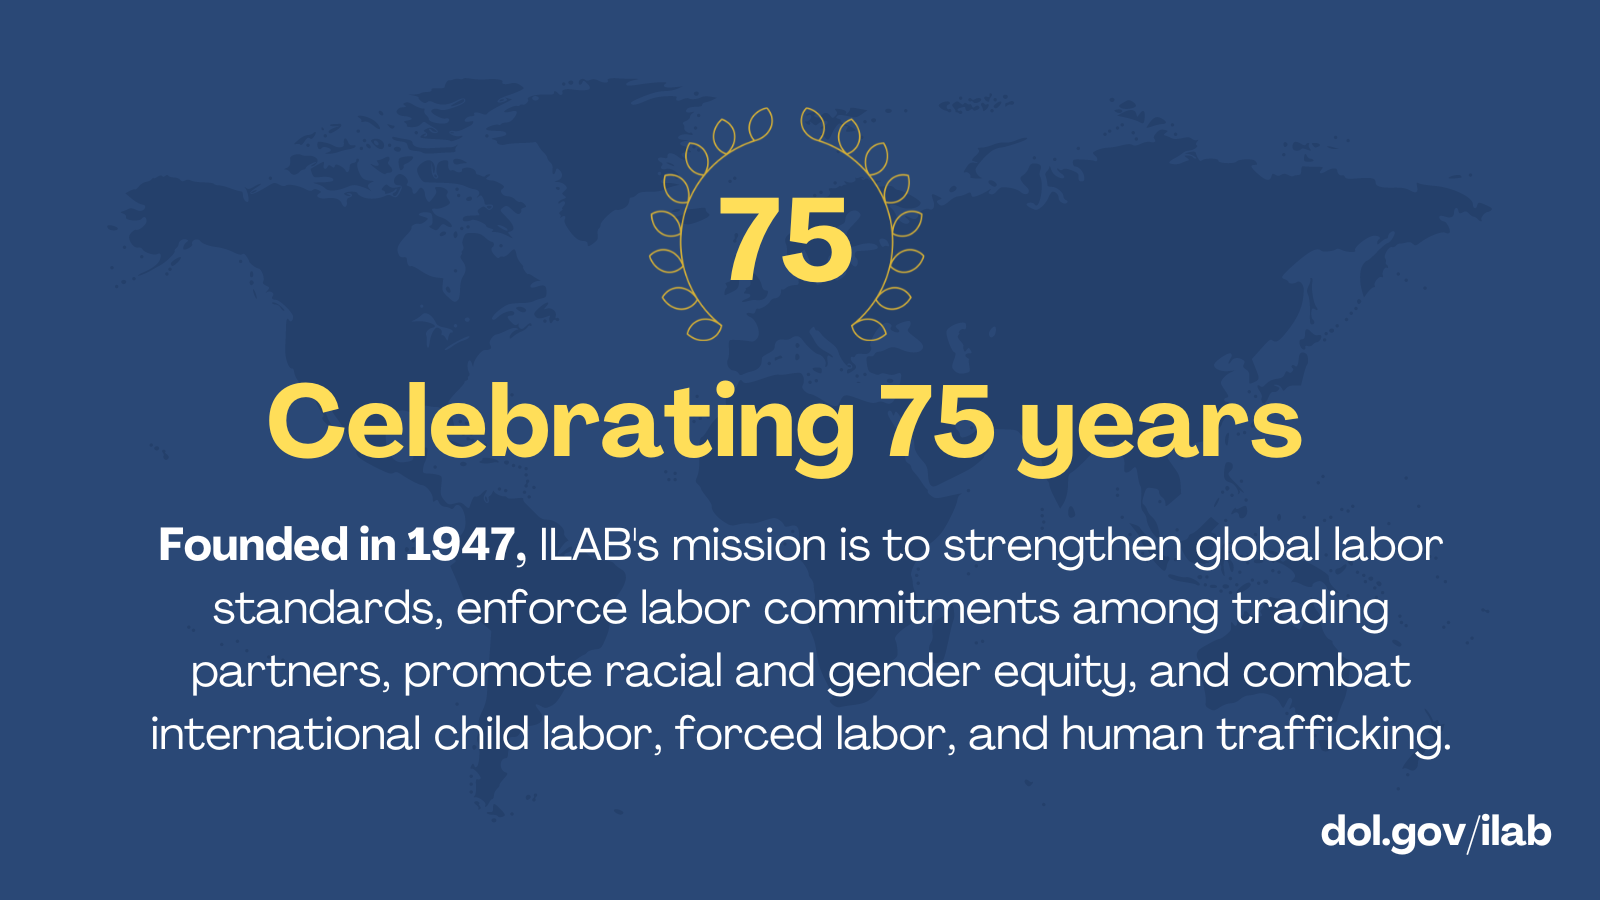 Founded in 1947, ILAB's mission is to strengthen global labor standards, enforce labor commitments among trading partners, promote racial and gender equity, and combat international child labor, forced labor, and human trafficking.